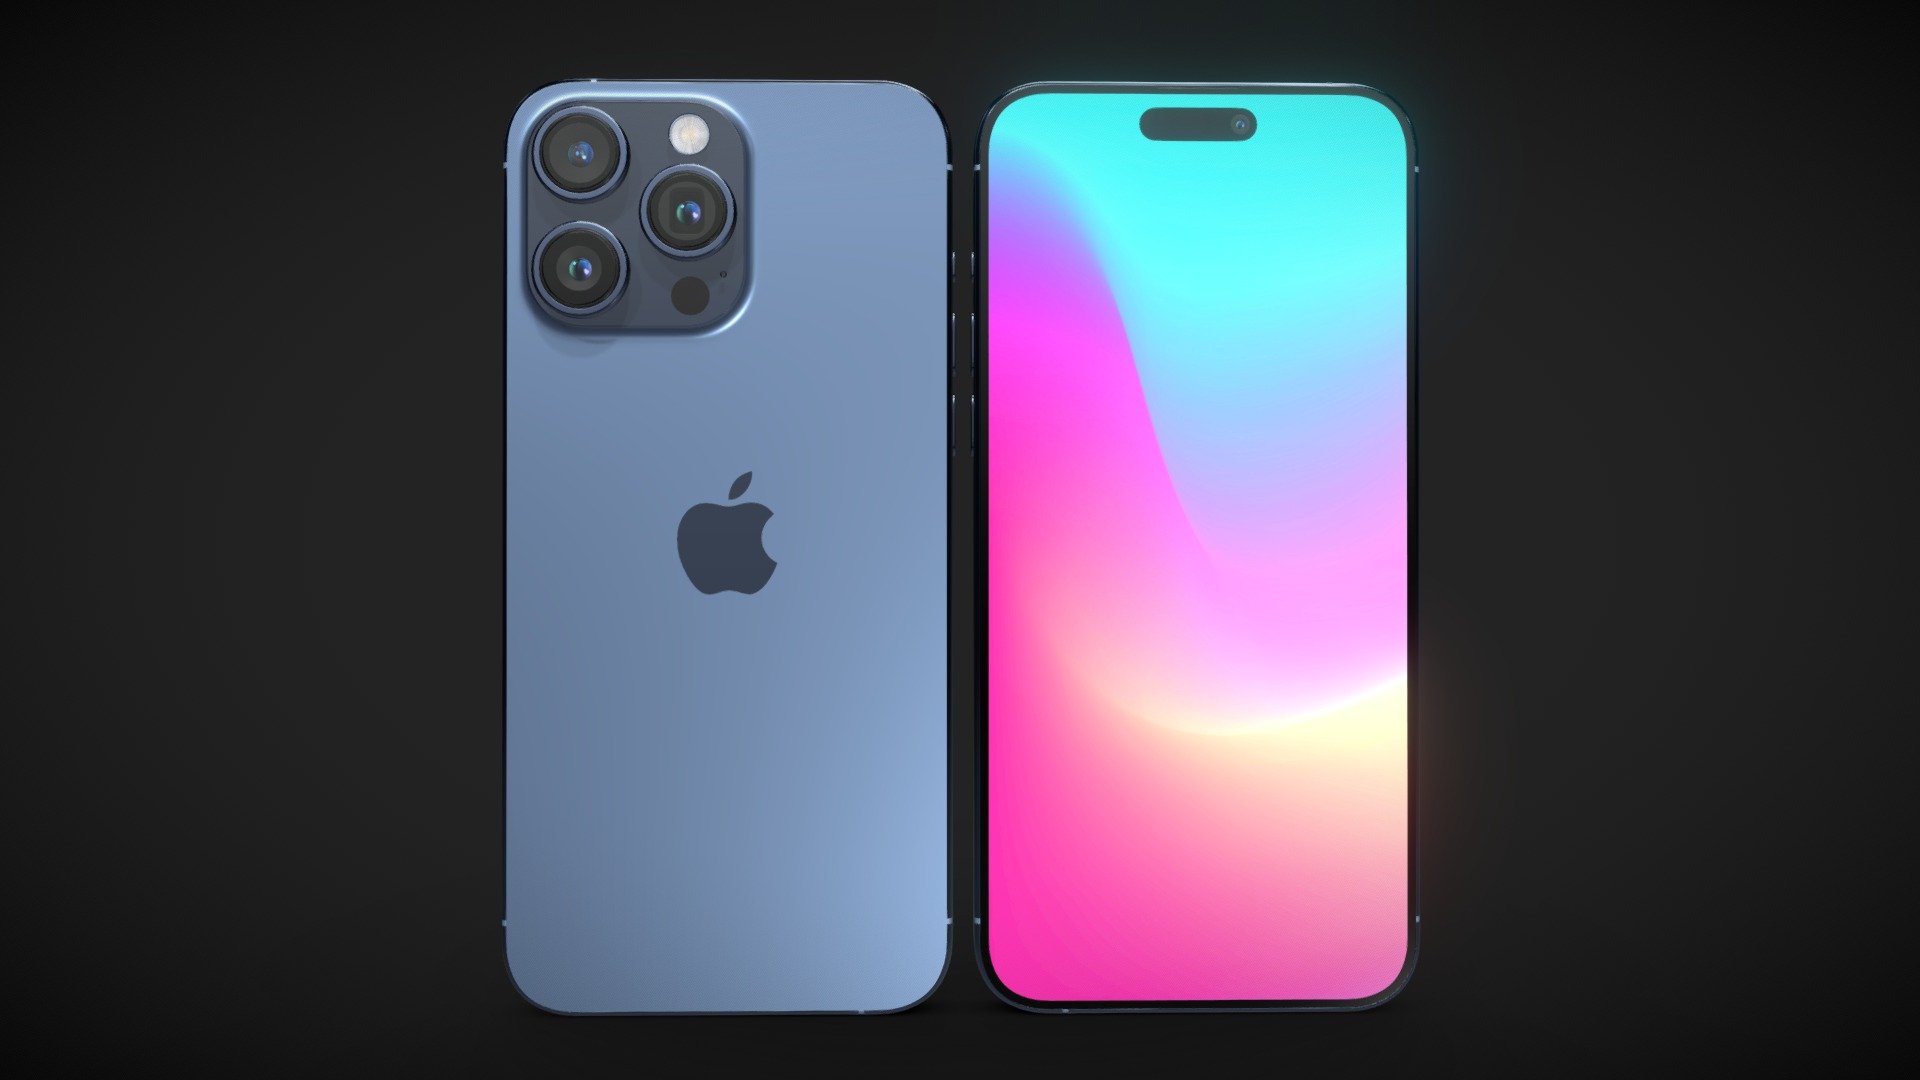 Realistic (copy) 3d model Apple iPhone 15 pro MAX v2.

This set:




1 file obj standard

1 file 3ds Max 2013 vray material

1 file 3ds Max 2013 corona material

1 file of 3Ds

1 file e3d full set of materials.

1 file cinema 4d standard.

1 file blender cycles.

Topology of geometry:




forms and proportions of The 3D model

the geometry of the model was created very neatly

there are no many-sided polygons

detailed enough for close-up renders

the model optimized for turbosmooth modifier

Not collapsed the turbosmooth modified

apply the Smooth modifier with a parameter to get the desired level of detail

Organization of scene:




to all objects and materials

real world size (system units - mm)

coordinates of location of the model in space (x0, y0, z0)

does not contain extraneous or hidden objects (lights, cameras, shapes etc.)
 - Apple iPhone 15 pro MAX v2 - Buy Royalty Free 3D model by madMIX 3d model